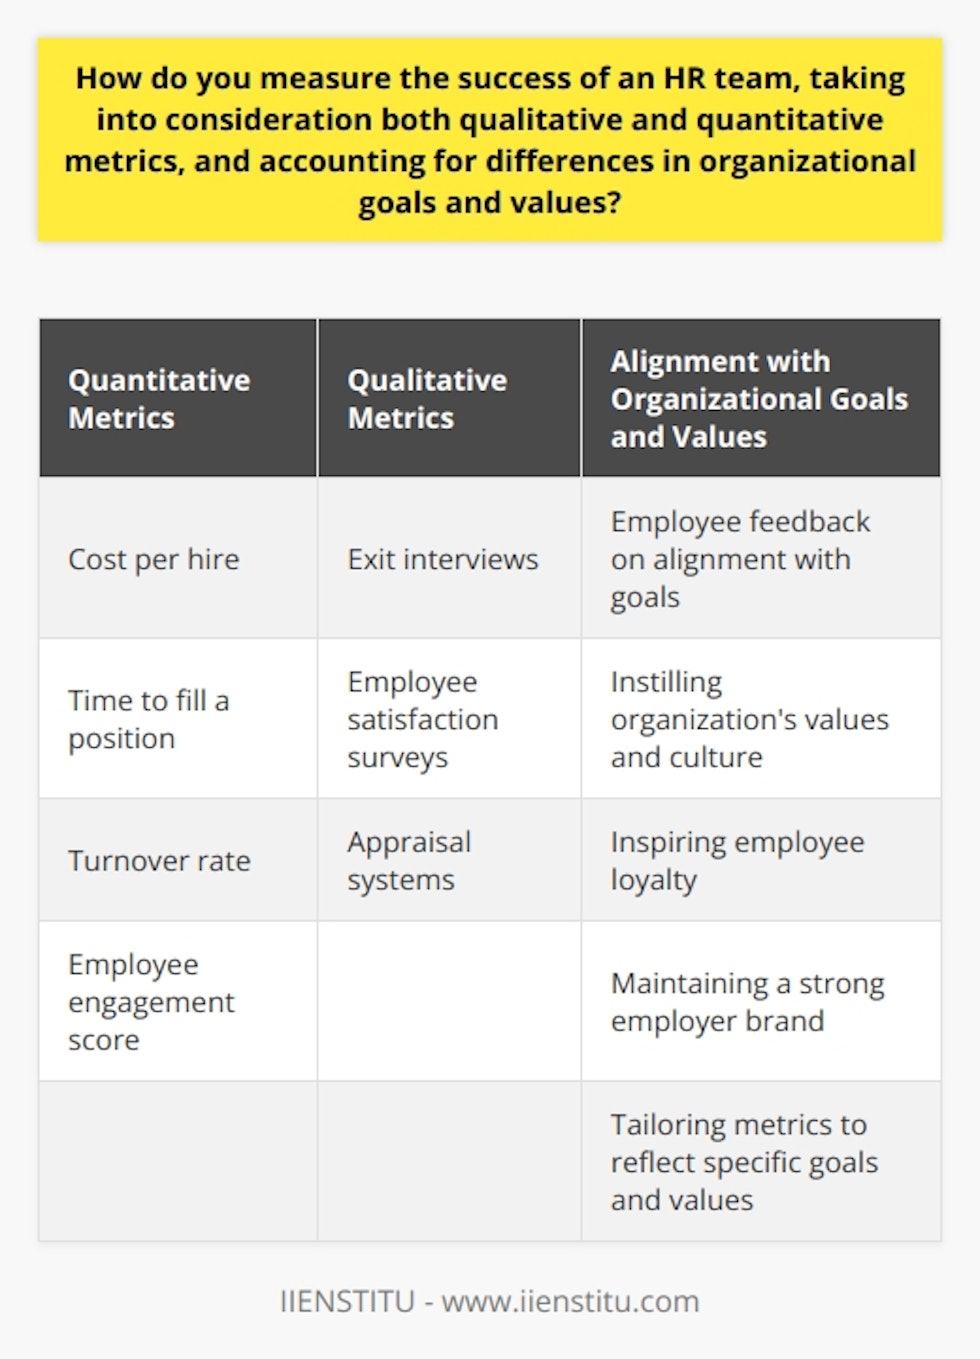 Measuring the success of an HR team is crucial for organizations in assessing their effectiveness in managing human resources and achieving organizational goals. To accurately measure HR success, it is important to consider both quantitative and qualitative metrics while also accounting for differences in organizational goals and values.Quantitative metrics provide objective and numerical data that can be measured and analyzed to assess HR team performance. Key Performance Indicators (KPIs) such as cost per hire, time to fill a position, turnover rate, and employee engagement score can offer valuable insights into the efficiency and effectiveness of the HR team. For example, a low cost per hire and a quick time to fill a position may indicate a successful HR team that efficiently attracts and recruits top talent. Similarly, a low turnover rate and high employee engagement score may suggest a strong HR team that effectively manages and retains employees.On the other hand, qualitative metrics provide subjective but insightful information about HR team performance. Gathering feedback from exit interviews, conducting employee satisfaction surveys, and implementing appraisal systems can help HR teams understand employee perceptions, satisfaction levels, and areas for improvement. This qualitative data can provide a more comprehensive understanding of the HR team's success in terms of employee satisfaction, retention, and overall organizational culture. By collecting and analyzing this qualitative data, HR teams can identify any areas that may need improvement, such as training and development programs or employee support systems.While both quantitative and qualitative metrics are important, it is crucial to align HR activities with organizational goals and values. A successful HR team should be able to instil the organization's values and culture, inspire employee loyalty, and maintain a strong employer brand. Metrics should be tailored to reflect these specific goals and values, including employee feedback on how well HR initiatives align with the overall organizational objectives. This alignment ensures that the HR team's efforts contribute to the overall success of the organization and help drive its long-term growth and performance.Ultimately, a balanced approach that incorporates both quantitative and qualitative metrics is essential in measuring the success of an HR team. This balanced approach allows for a more holistic and comprehensive view of HR performance, taking into account both the tangible and intangible aspects of the HR function. However, it is important to customize this balance based on the organization's unique goals, values, and culture. By doing so, organizations can accurately measure and assess the success of their HR teams in a fair and meaningful manner.